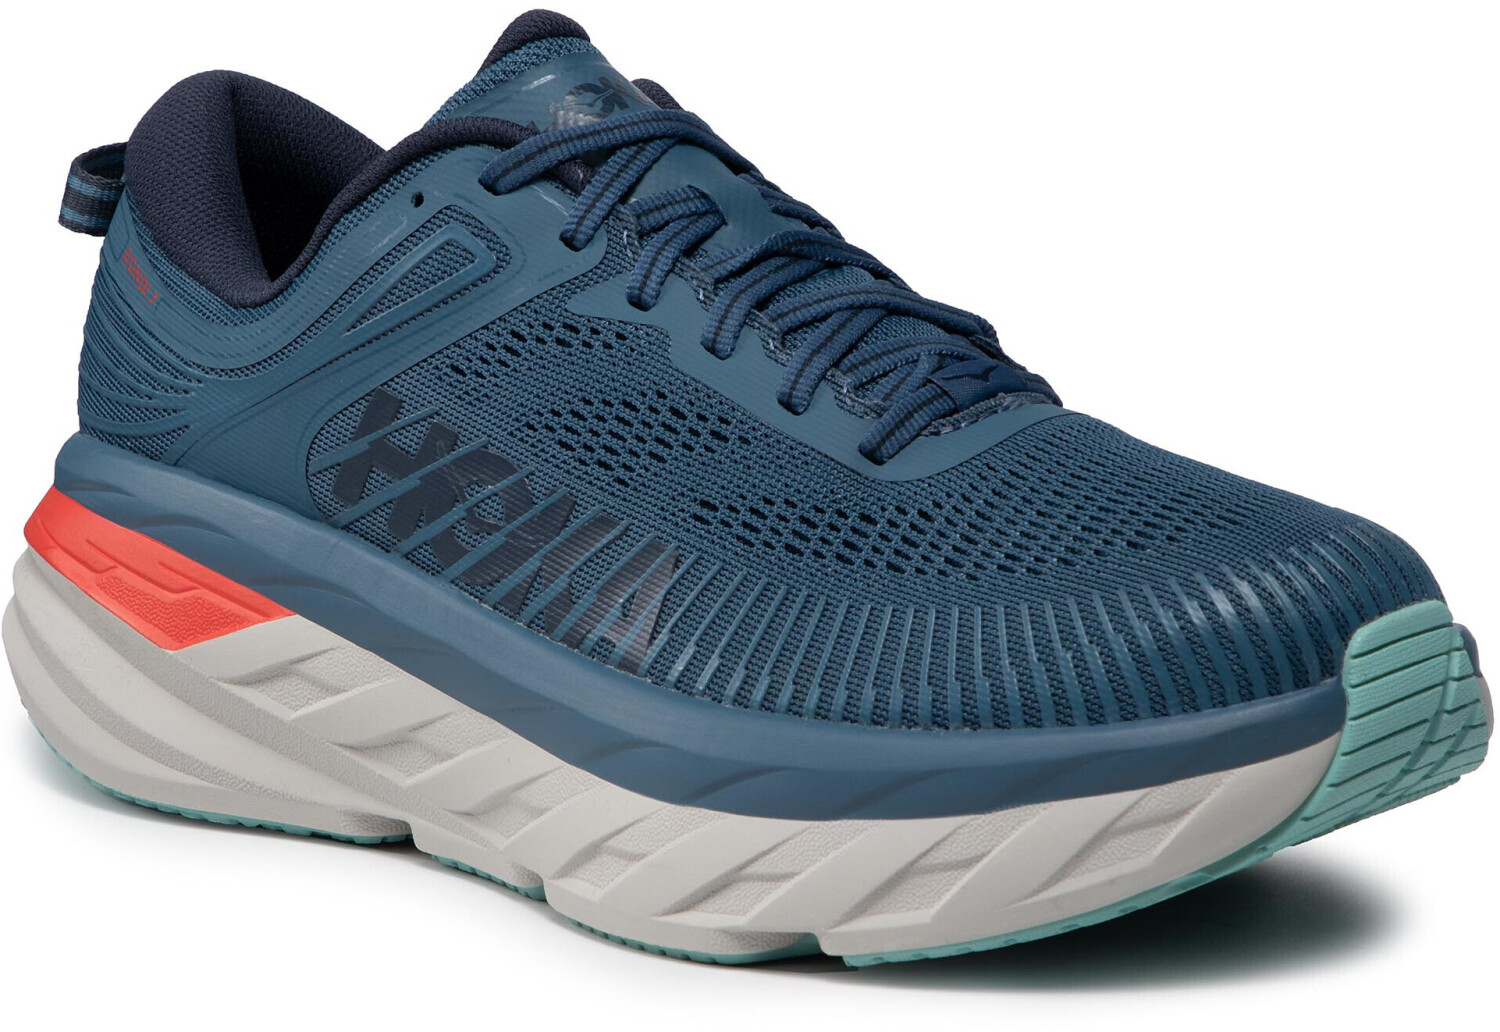 Buy Hoka Bondi 7 Men's real teal/outer space from £91.00 (Today